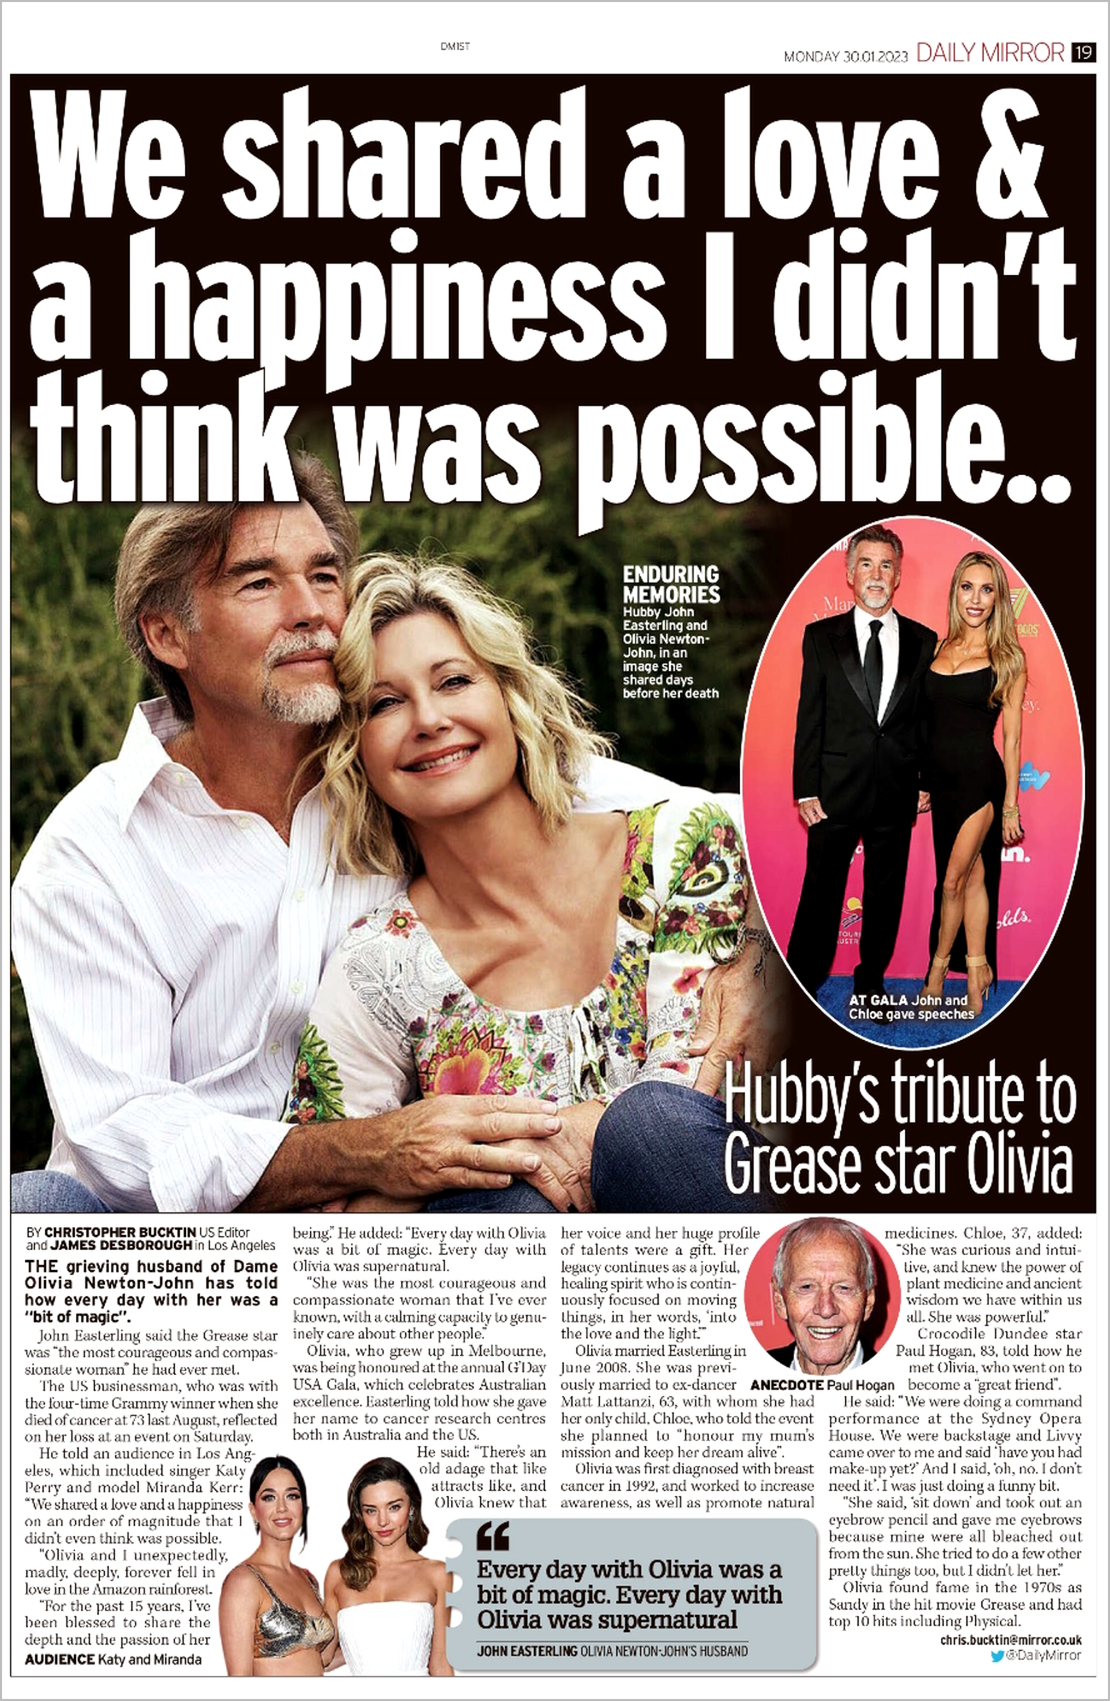 We shared a love & a happiness I didn’t think was possible - Daily Mirror